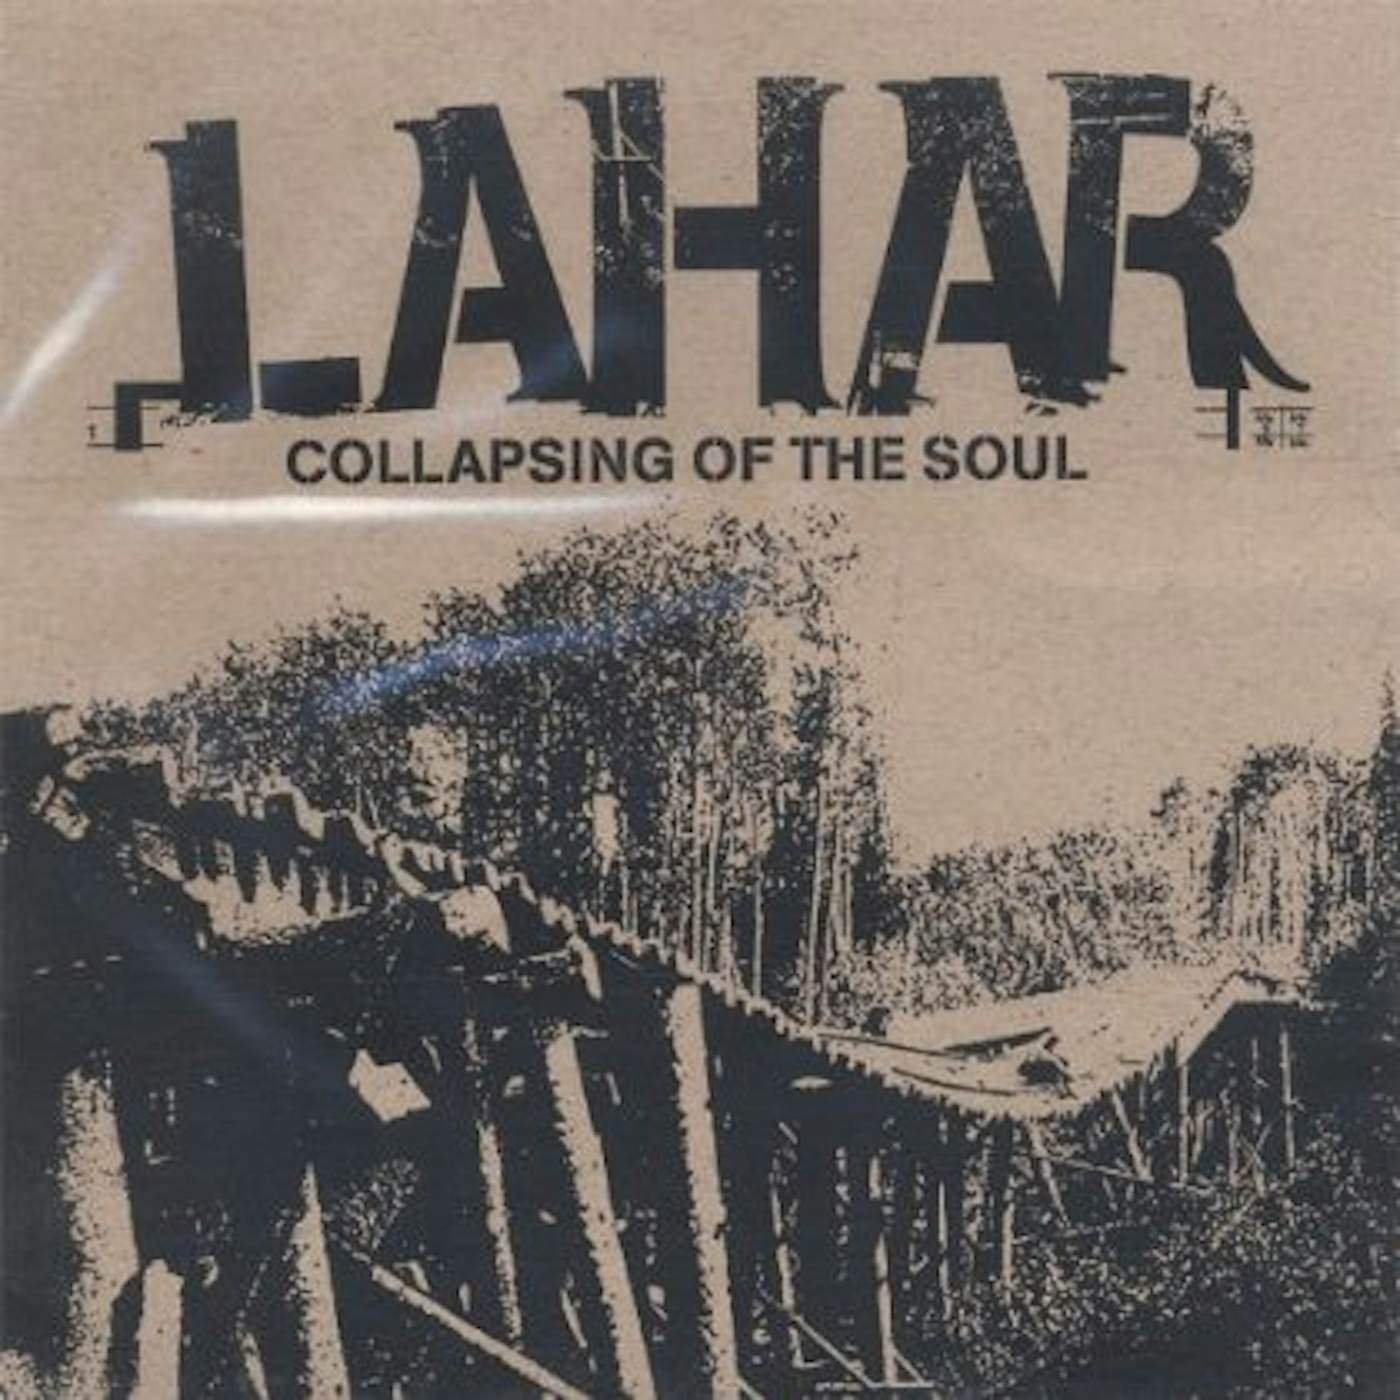 Lahar COLLAPSING OF THE SOUL CD